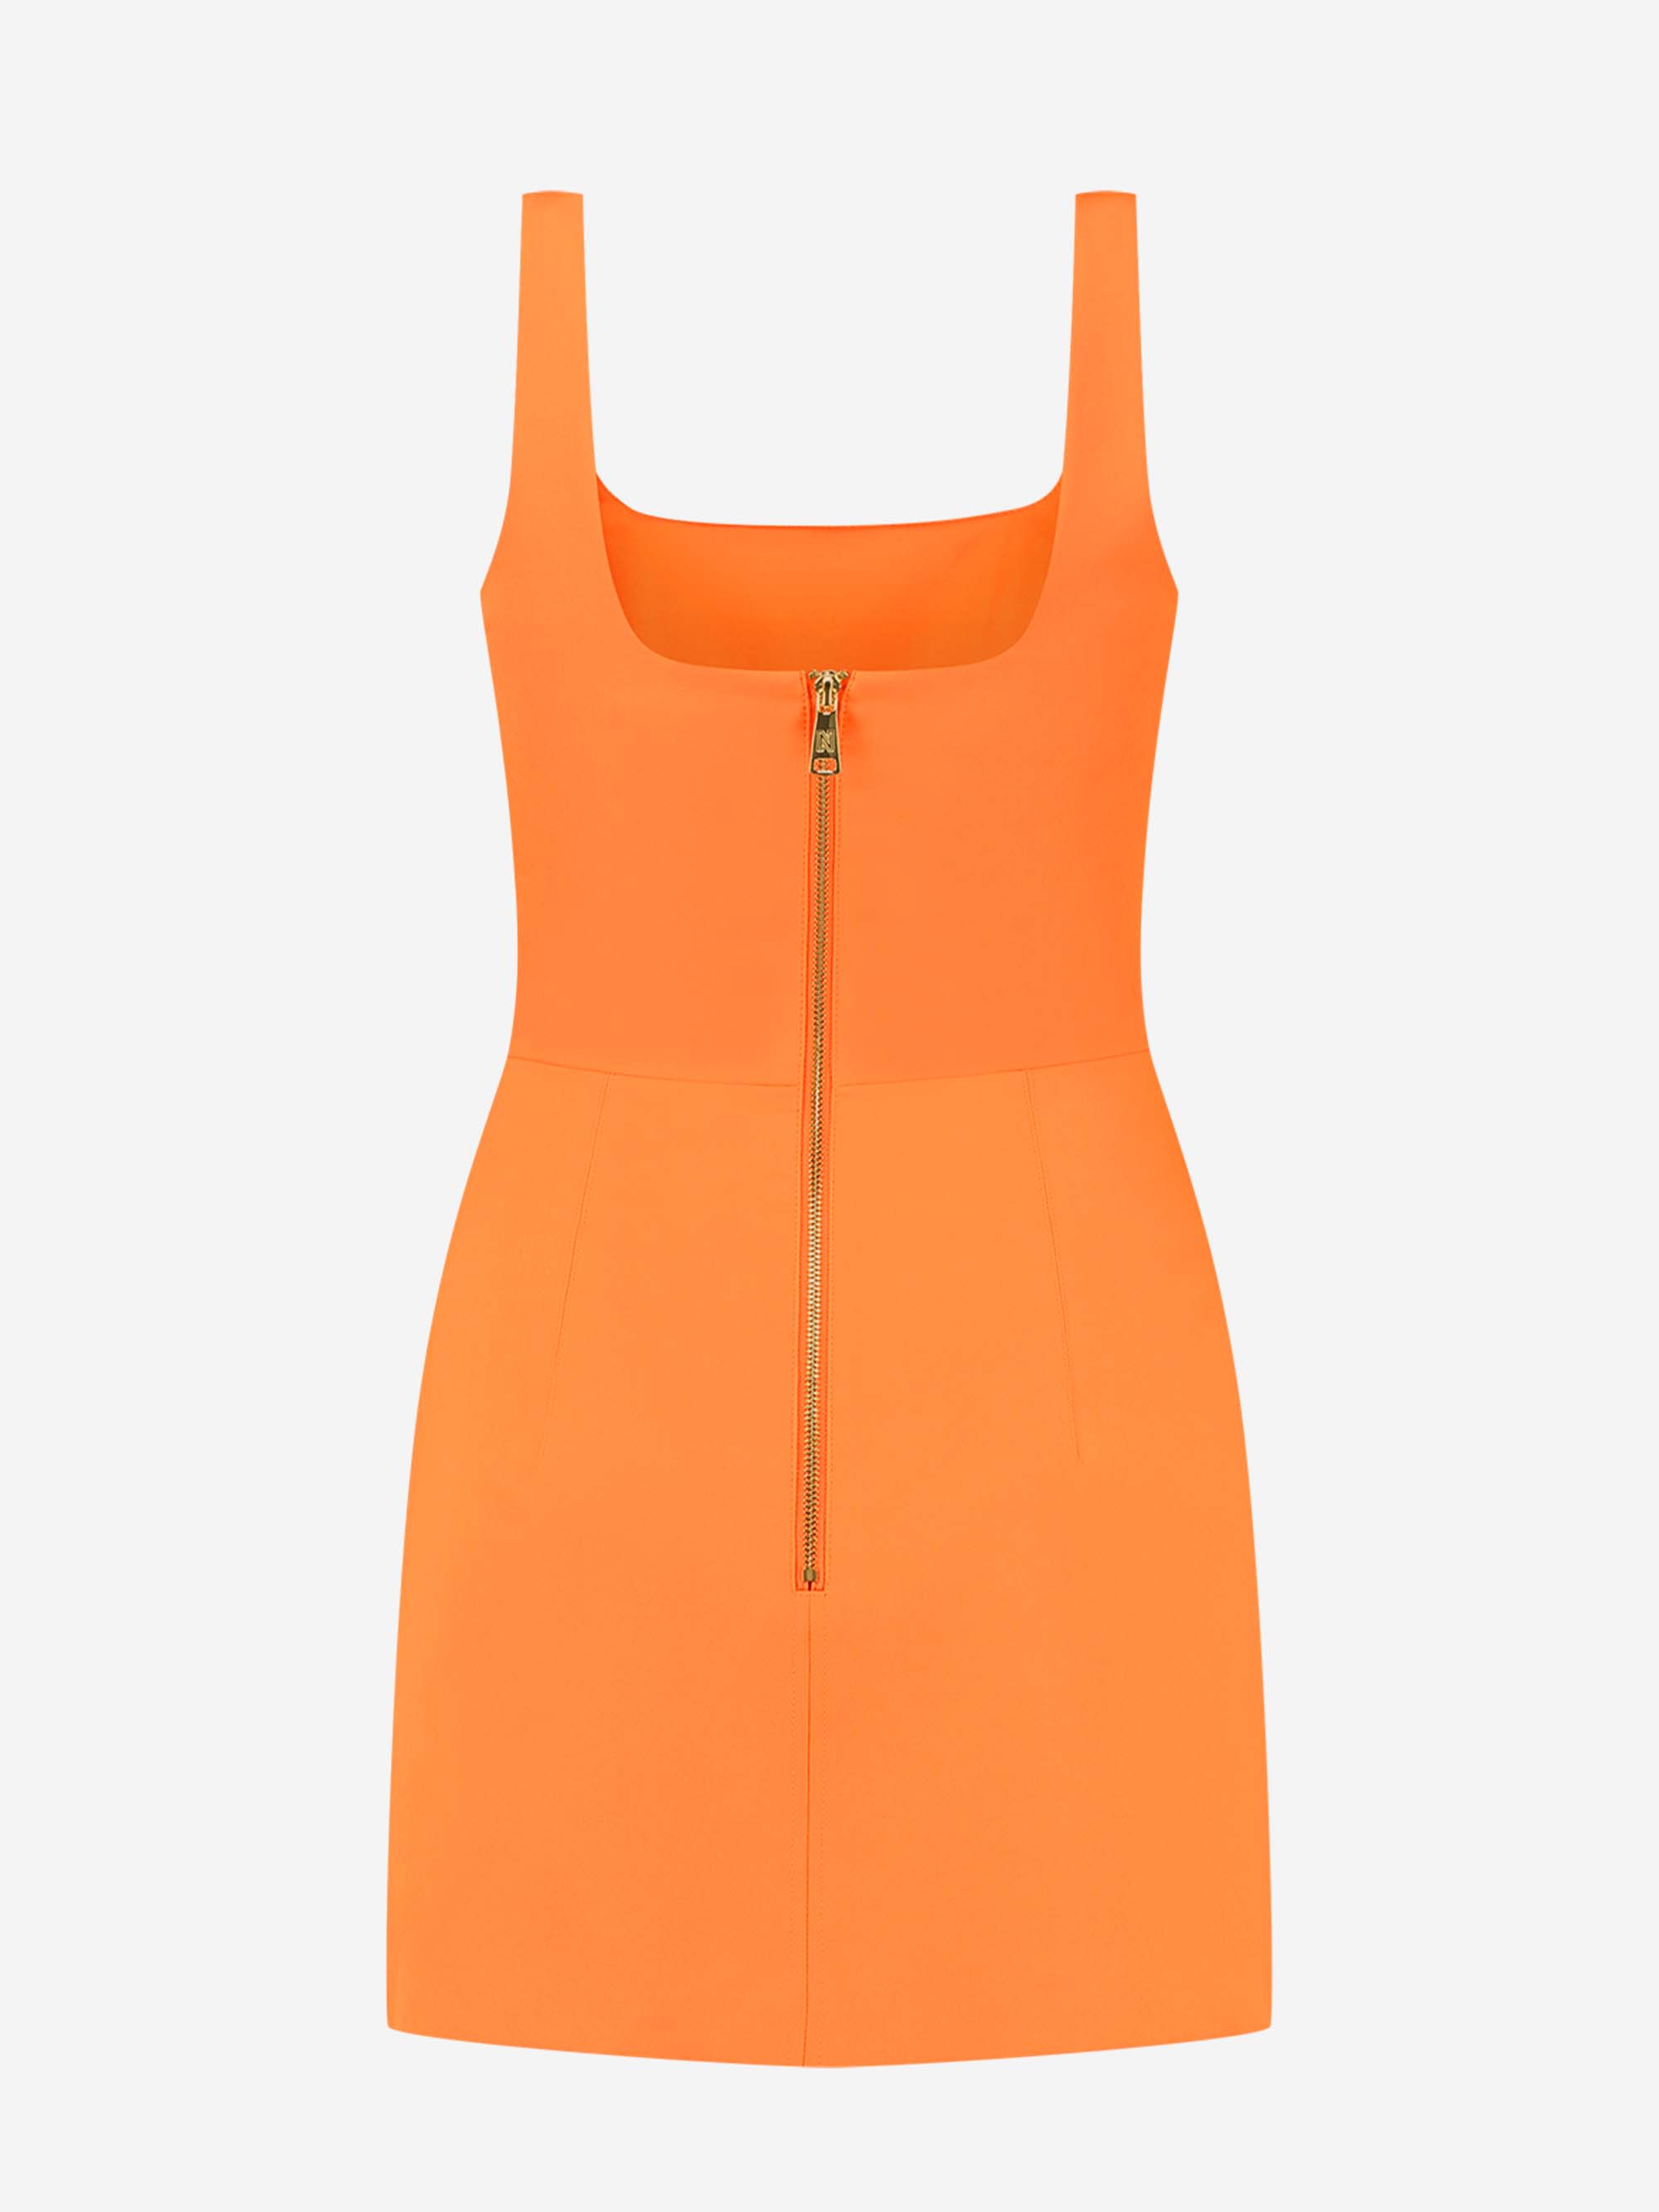 Fitted dress with square neckline